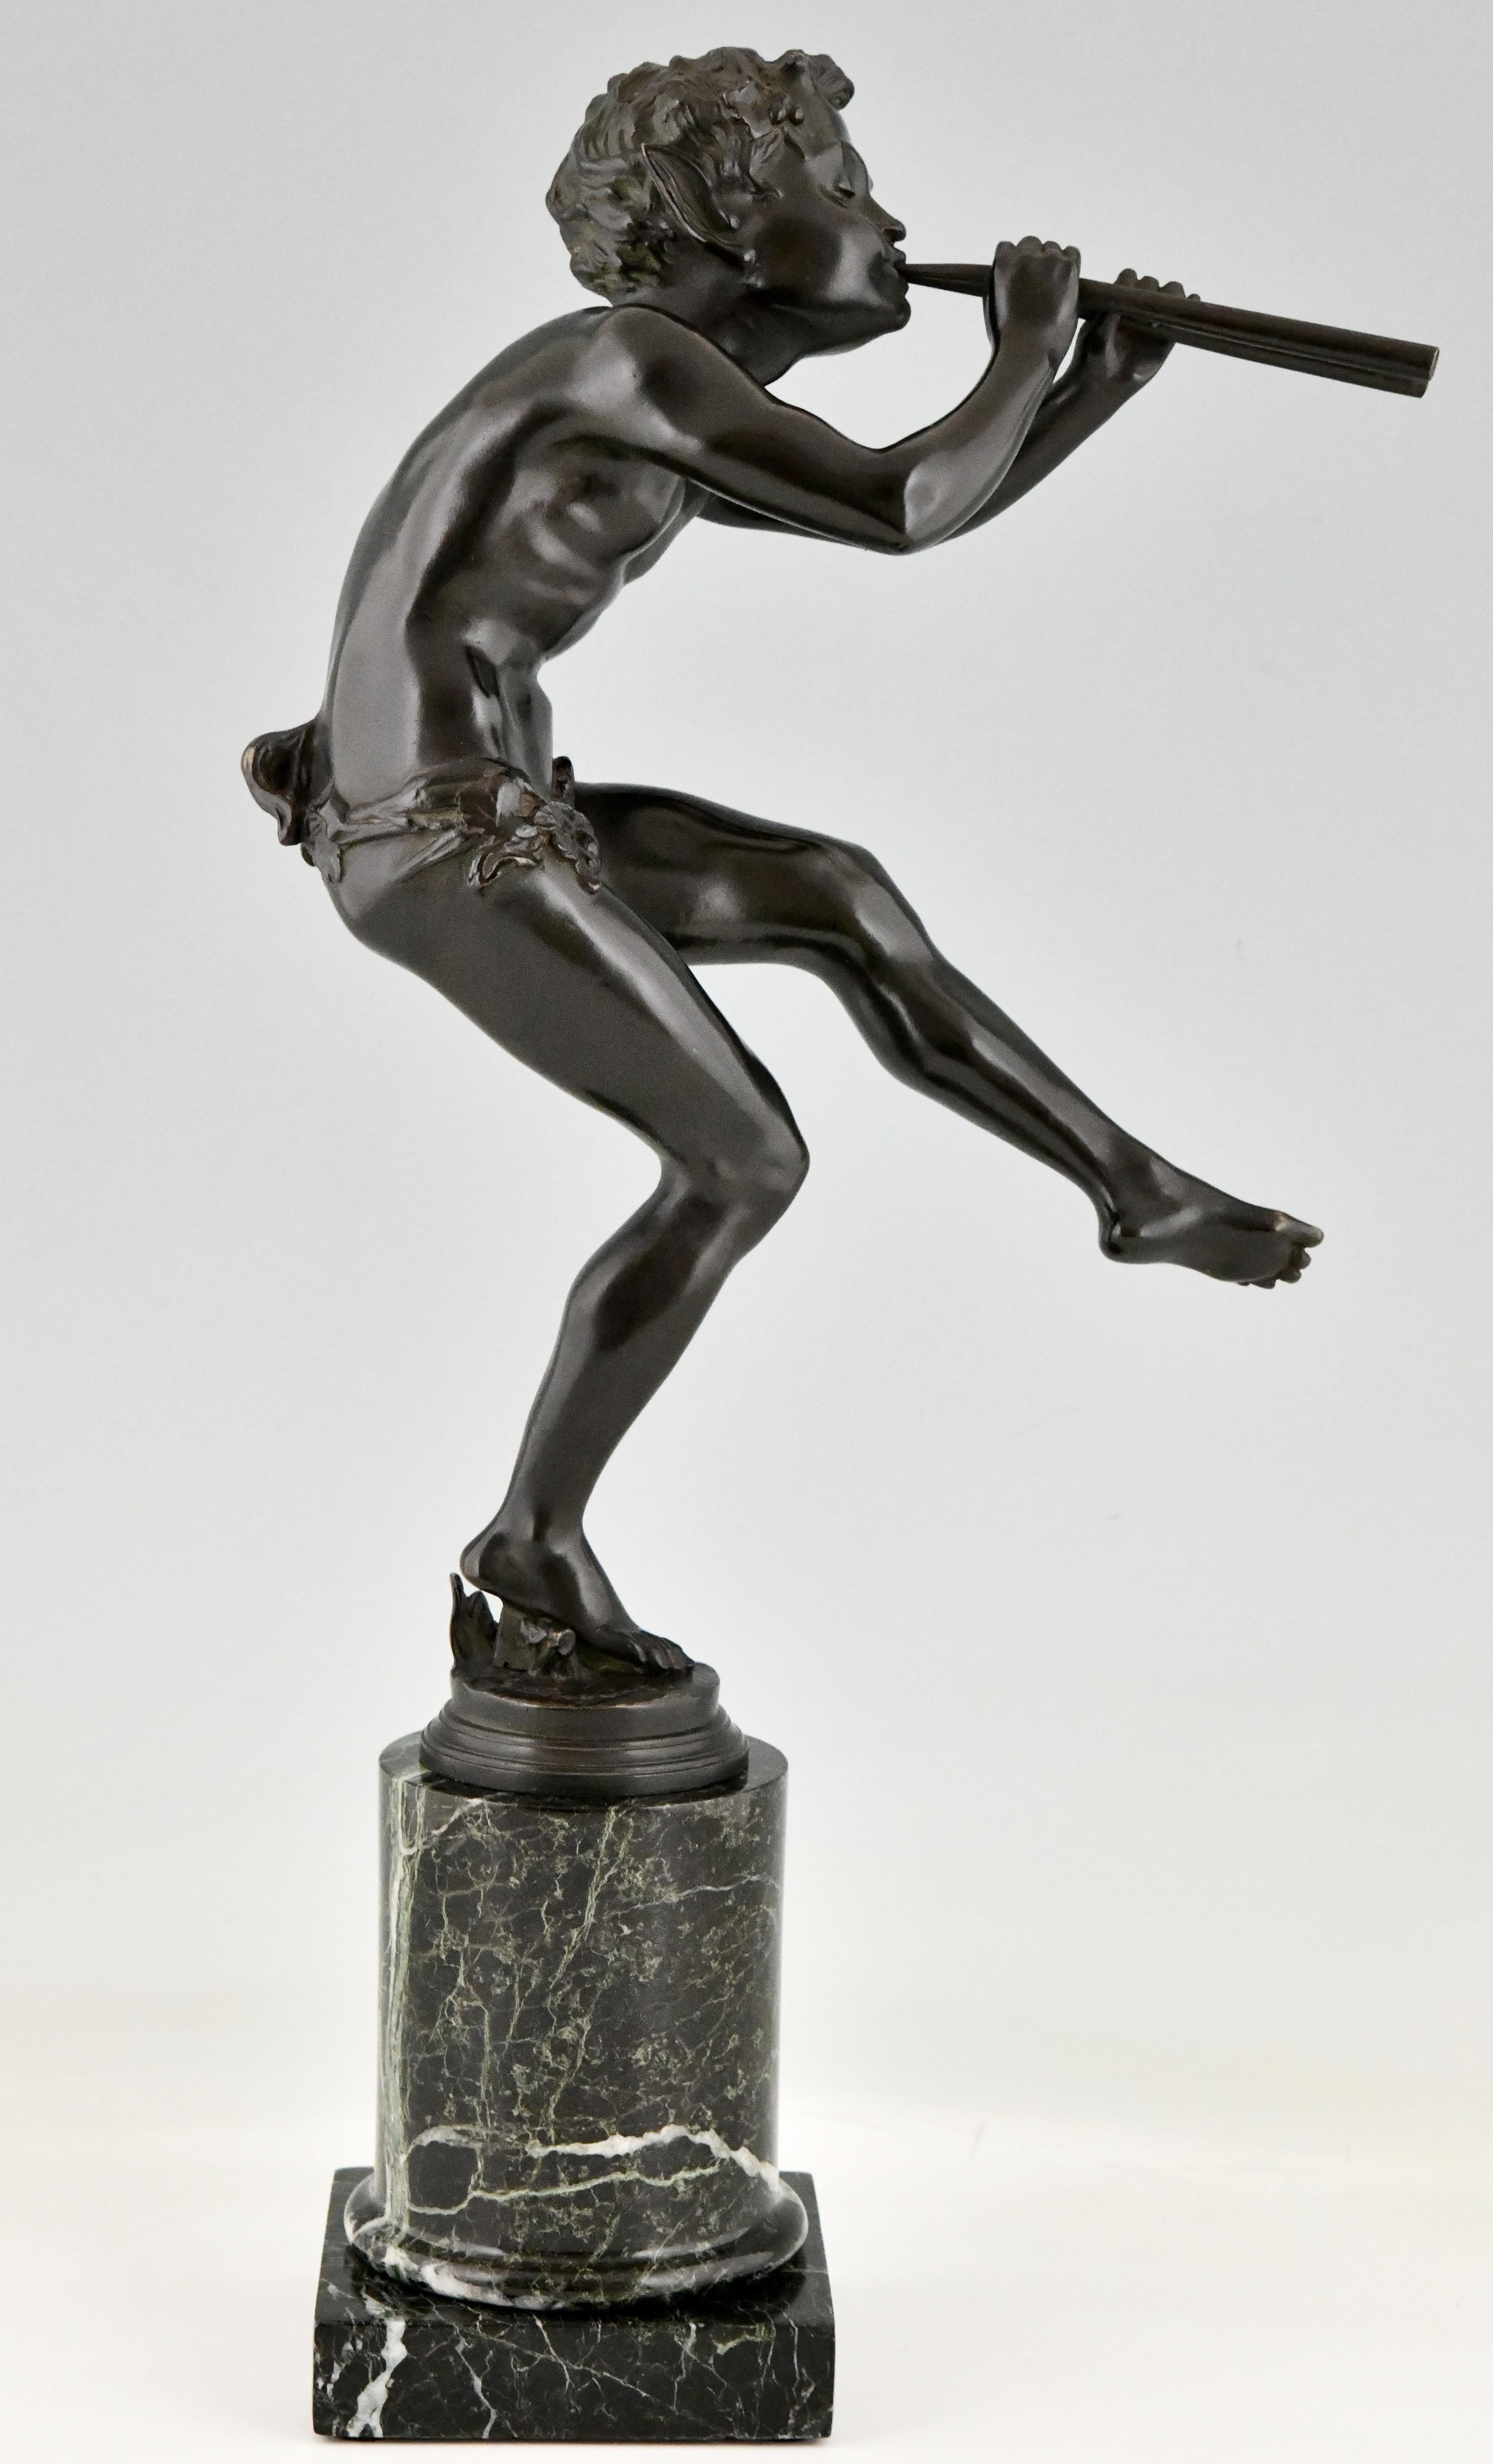 Early 20th Century Art Deco Bronze Sculpture Dancing Faun with Flutes by Edouard Drouot 1920